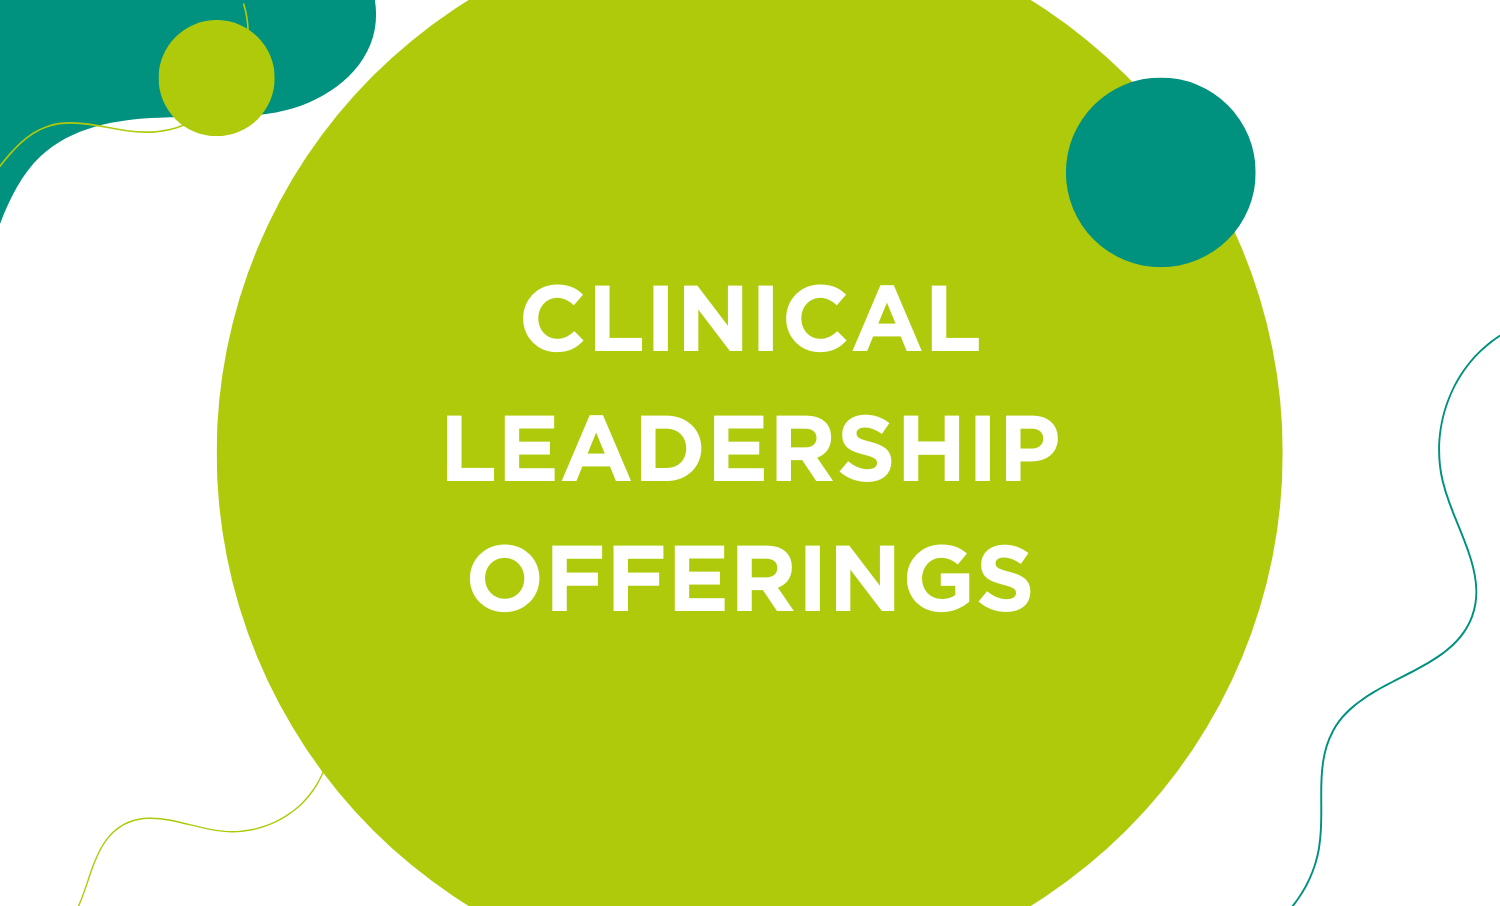 Clinical Leadership Offerings inside green circle